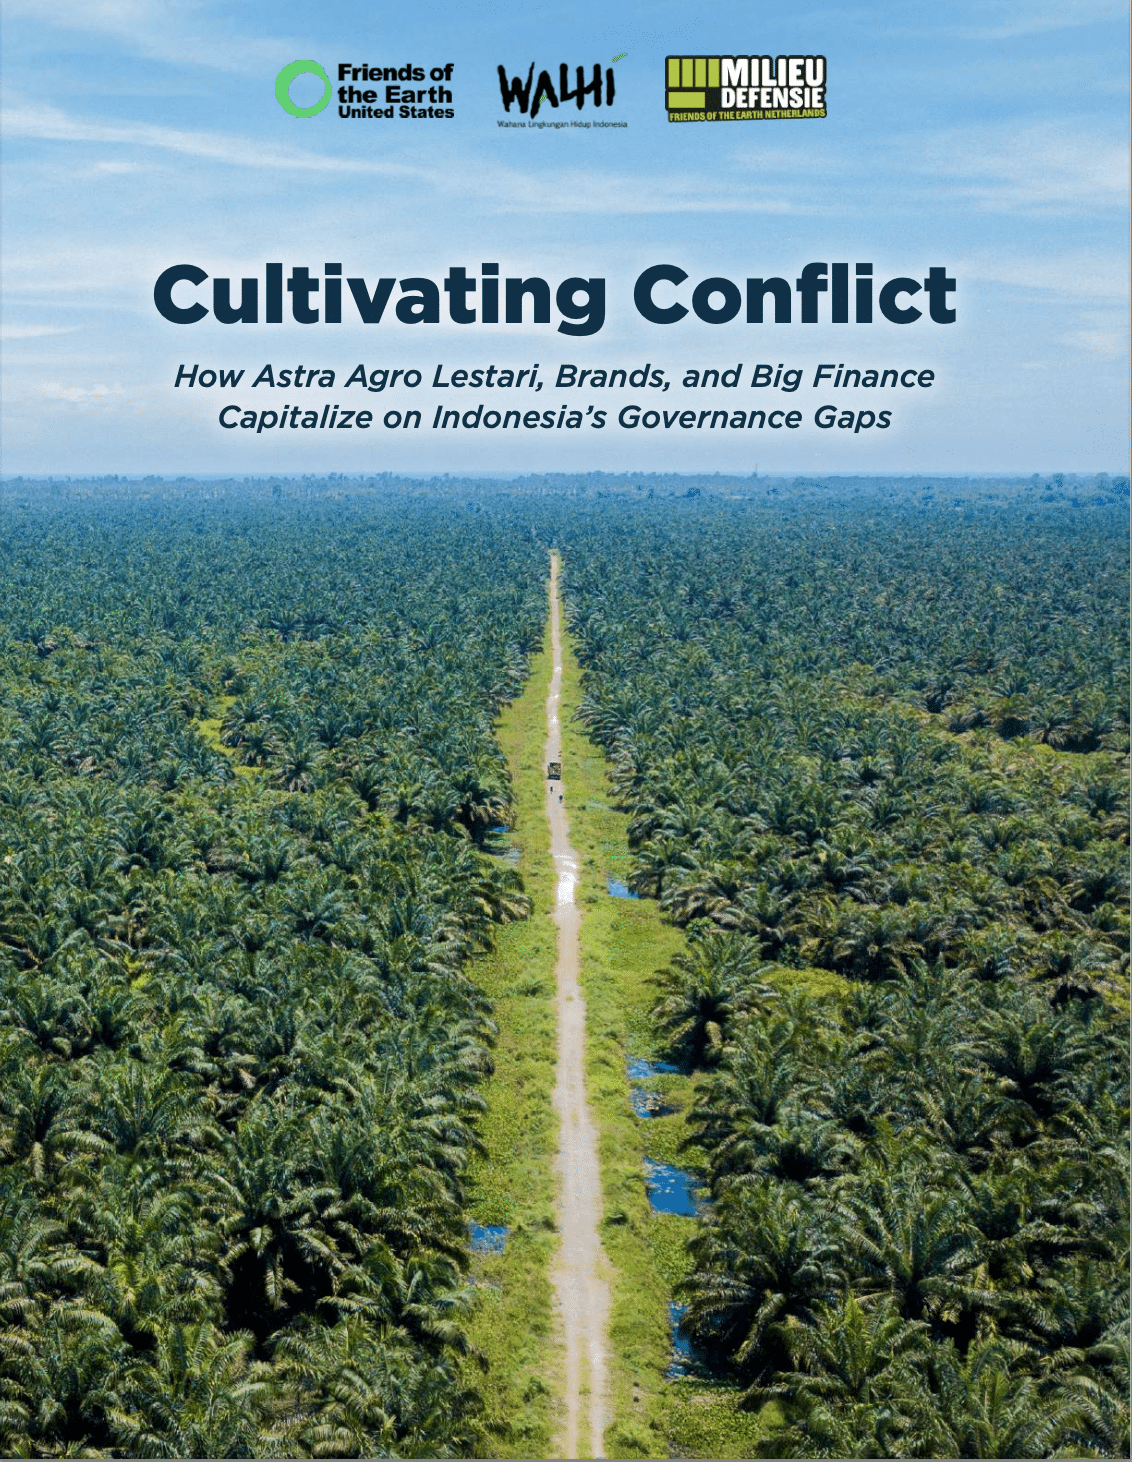 Cultivating Conflict: How Astra Agro Lestari, Brands, and Big Finance Capitalize on Indonesia’s Governance Gaps